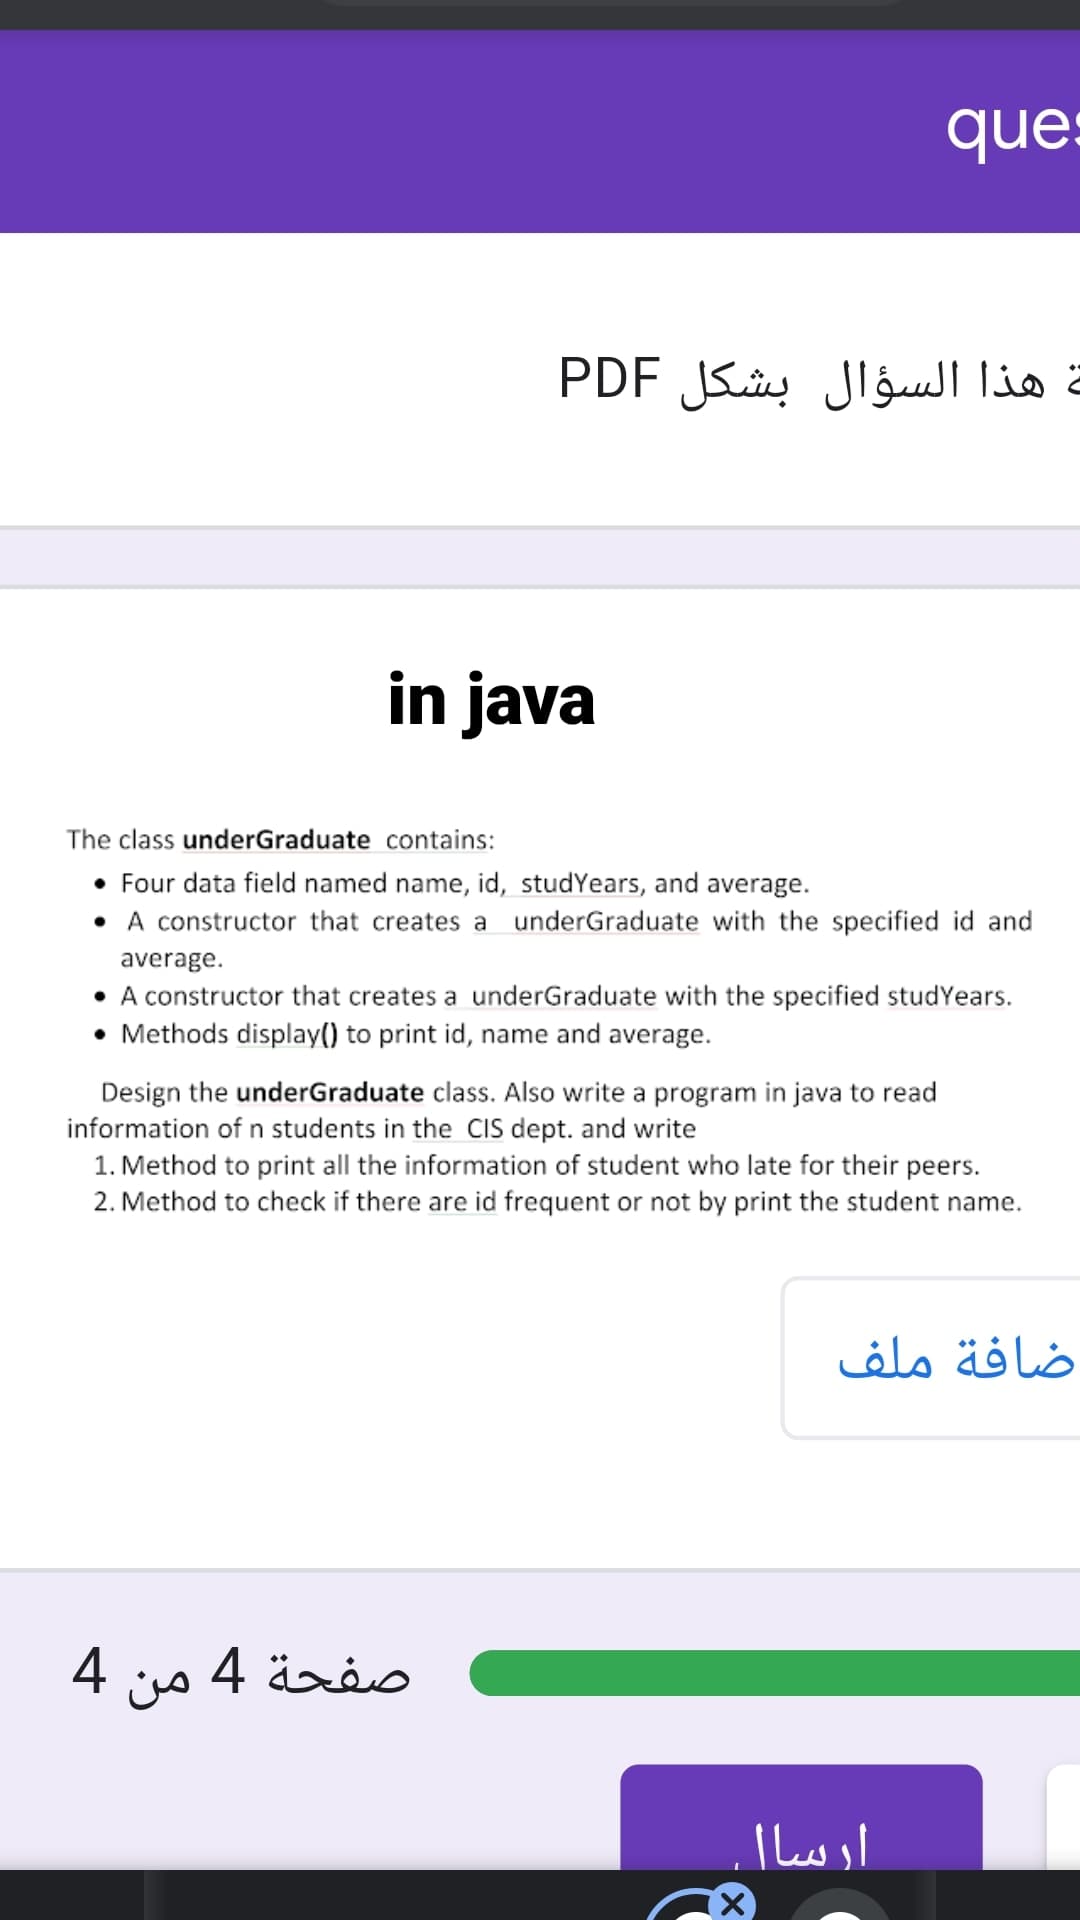 ques
هذا السؤال بشكل PDF
in java
The class underGraduate contains:
• Four data field named name, id, studYears, and average.
• A constructor that creates a underGraduate with the specified id and
average.
• A constructor that creates a underGraduate with the specified studYears.
• Methods display() to print id, name and average.
Design the underGraduate class. Also write a program in java to read
information of n students in the CIS dept. and write
1. Method to print all the information of student who late for their peers.
2. Method to check if there are id frequent or not by print the student name.
ضافة ملف
صفحة 4 من 4
ارسا|
